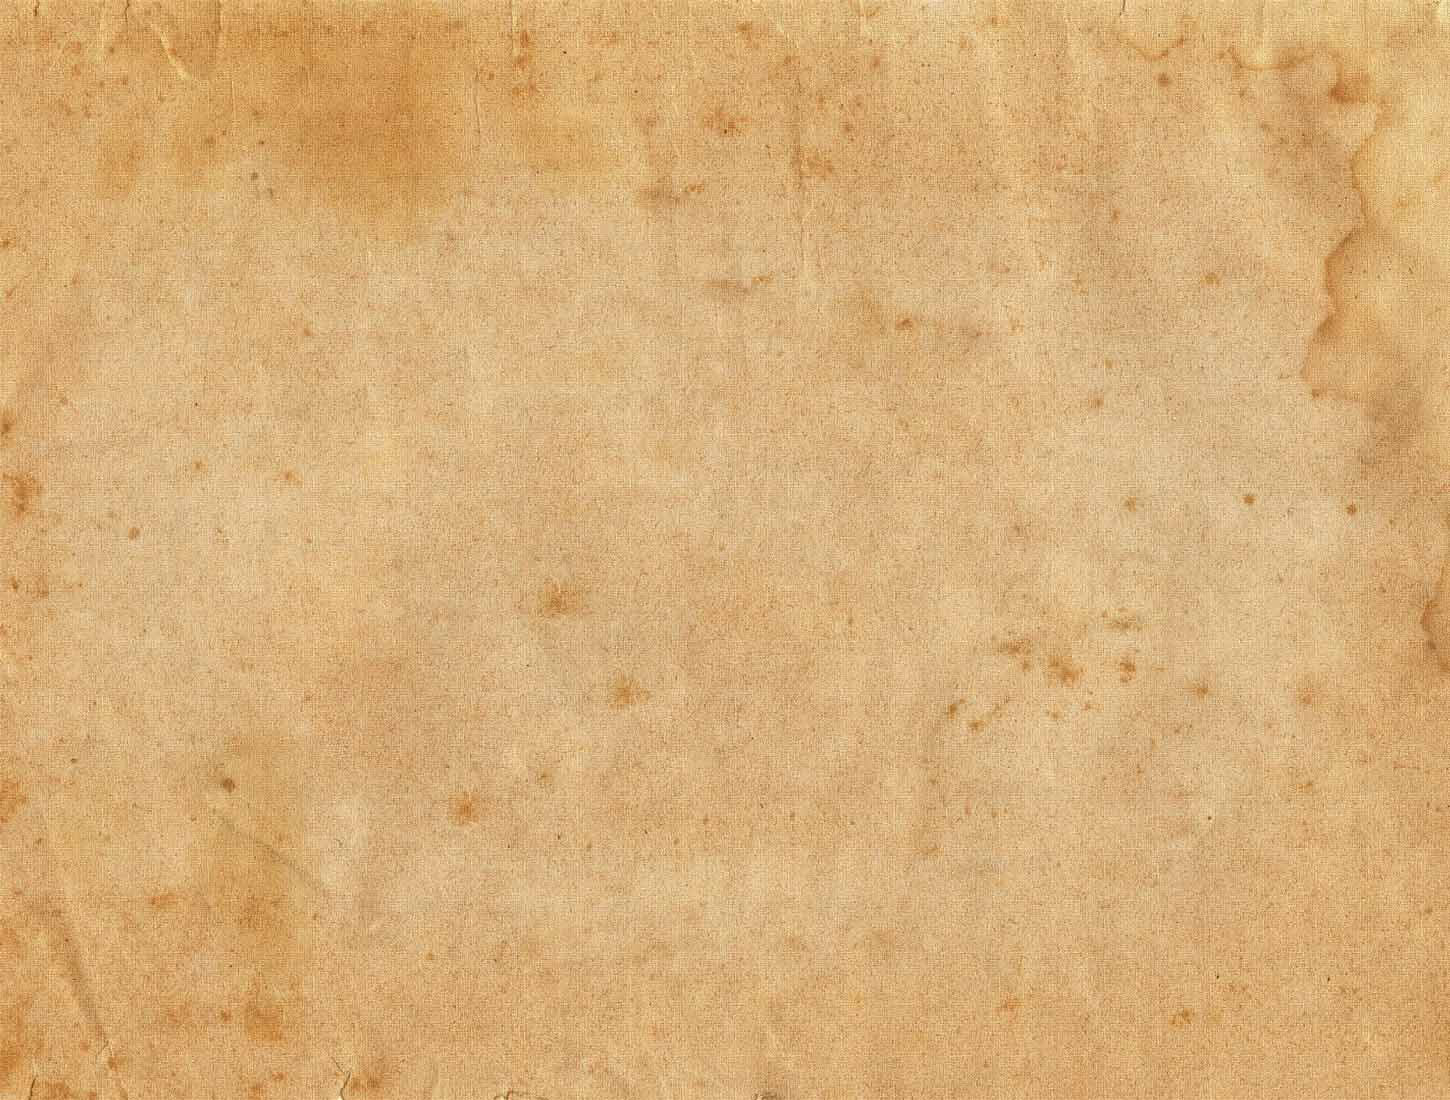 Old Beige Blank Paper Free Ppt Backgrounds For Your Throughout Blank Old Newspaper Template